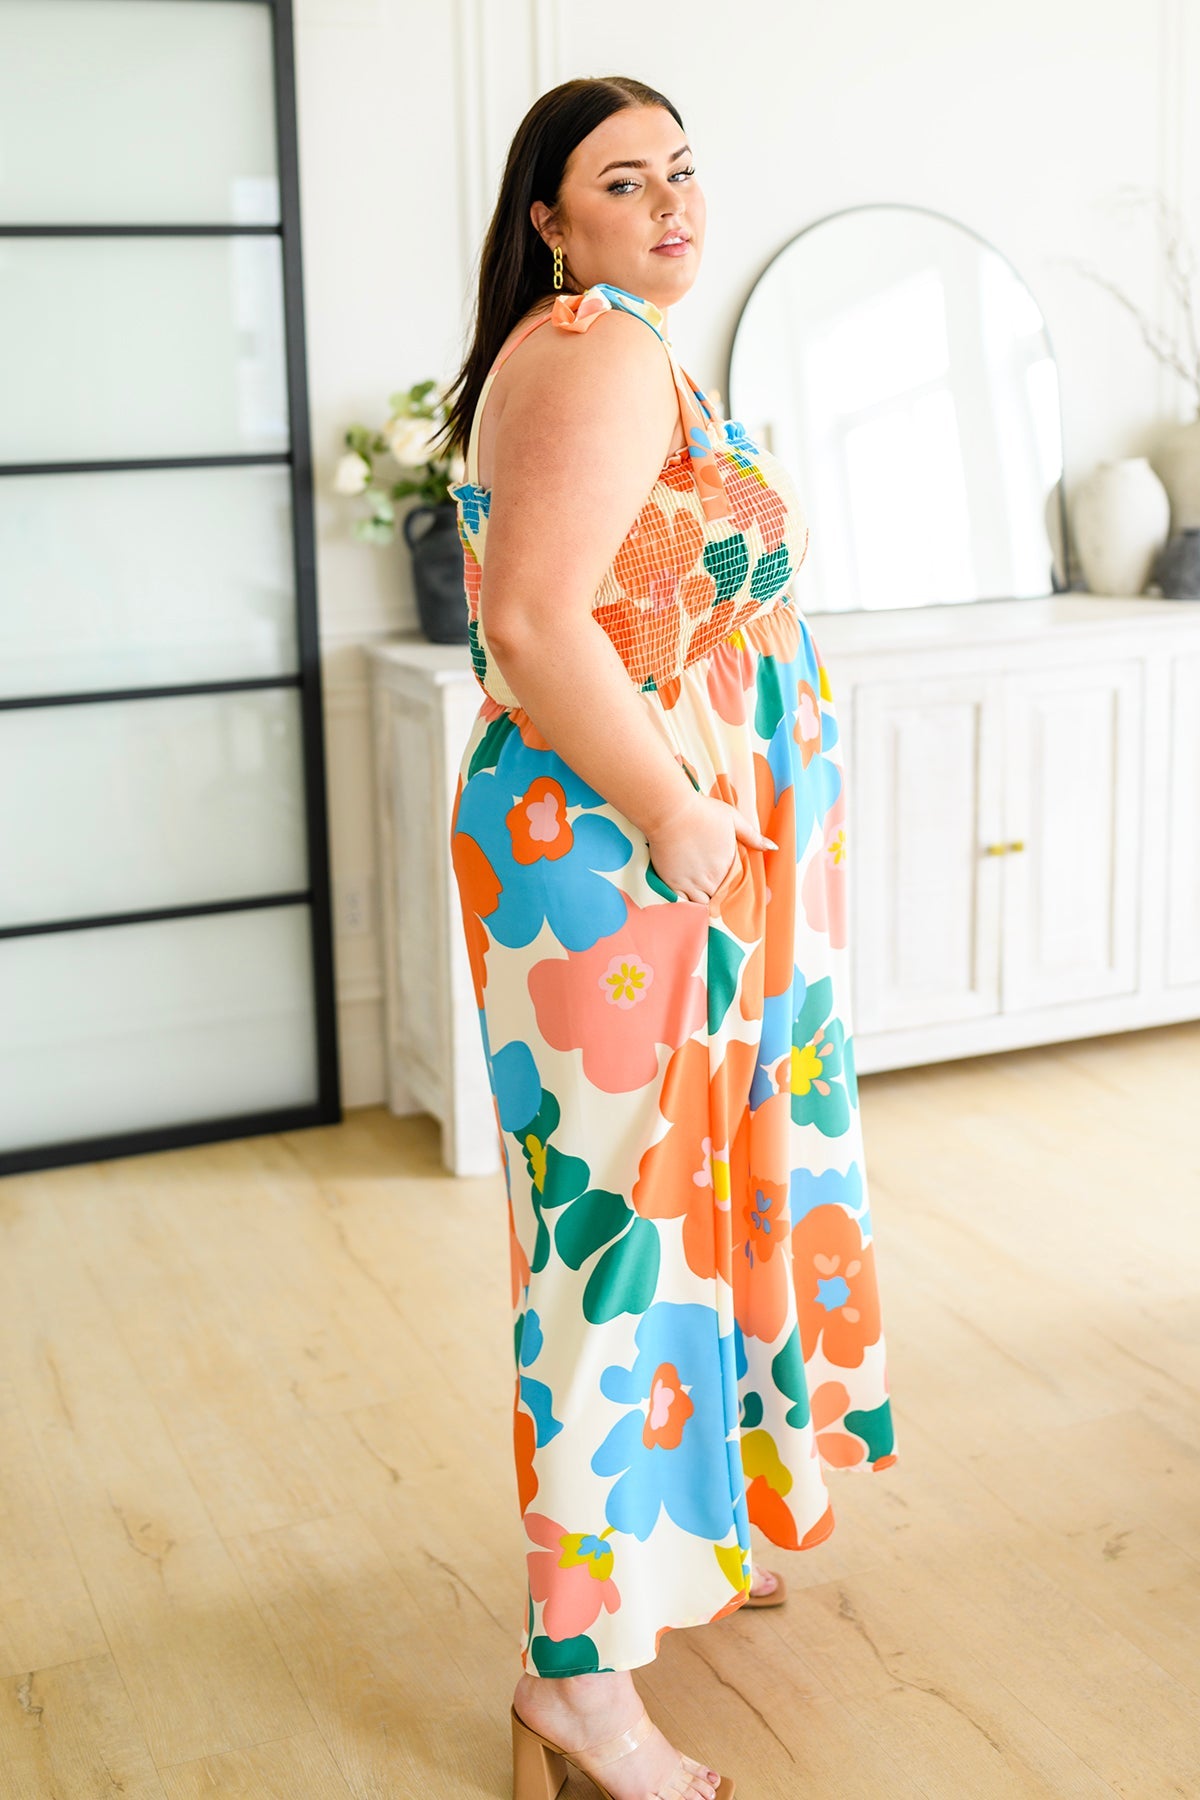 Hawaii Here I Come Floral Maxi Dress, SMALL left!